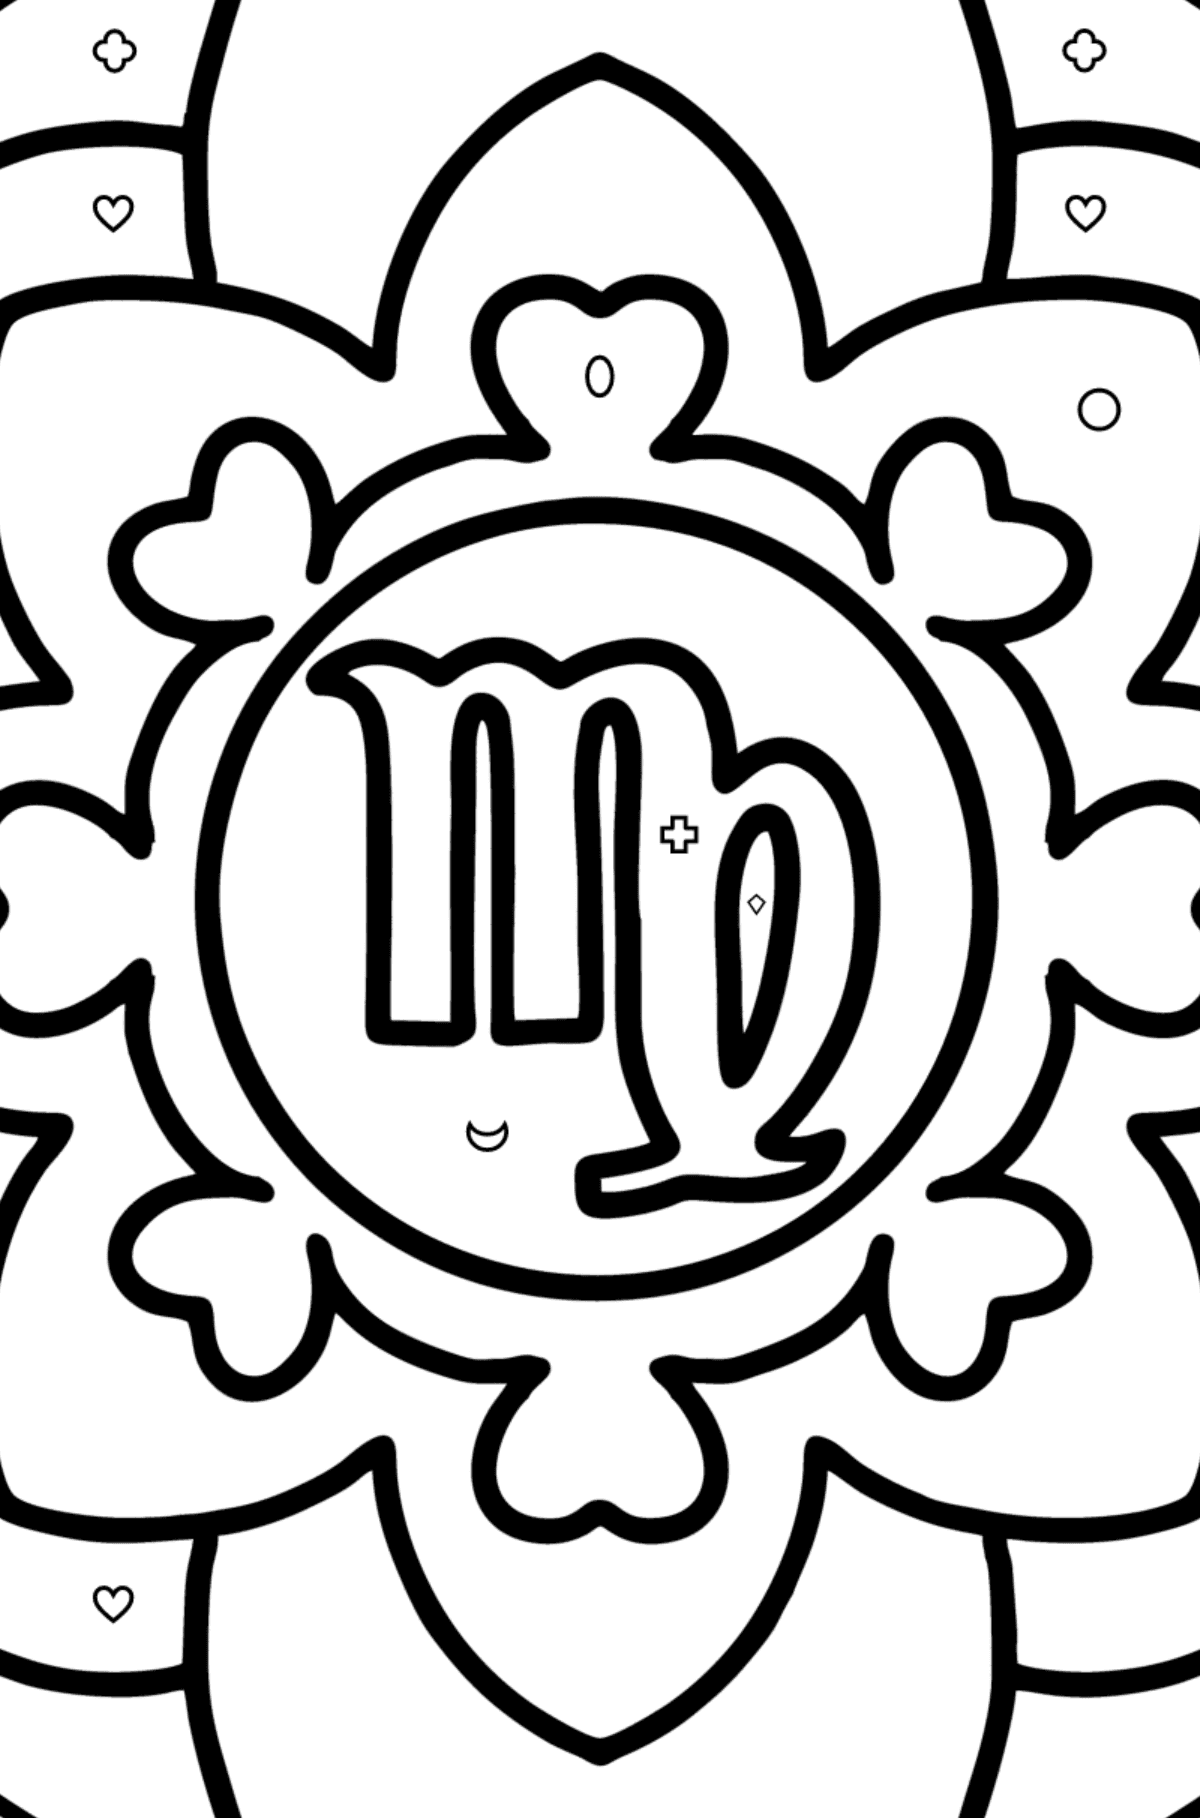 Coloring page - zodiac sign Virgo - Coloring by Geometric Shapes for Kids